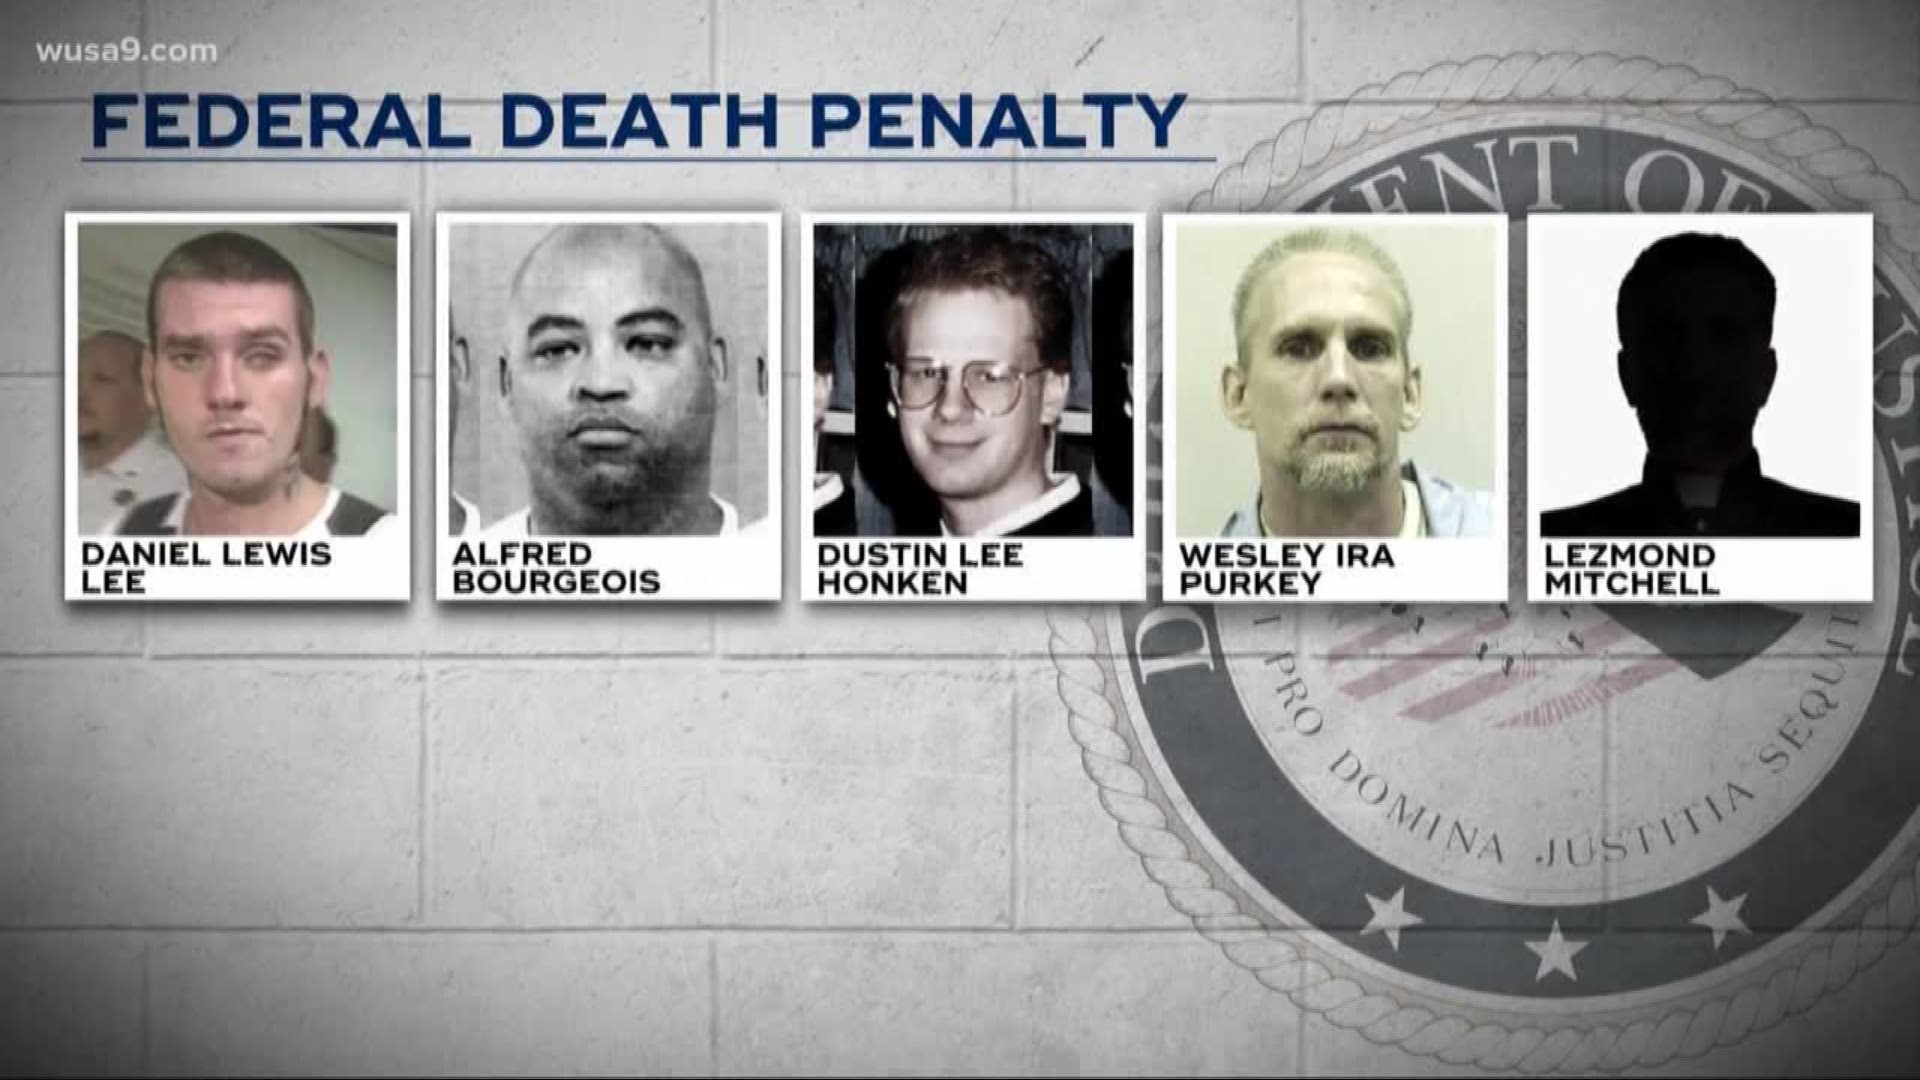 The Justice Department said Thursday the federal government will resume executing death-row inmates for the first time since 2003, ending an informal moratorium even as the nation sees a broad shift away from capital punishment.

Attorney General William Barr instructed the Bureau of Prisons to schedule executions starting in December for five men , all accused of murdering children. Although the death penalty remains legal in 30 states, executions on the federal level are rare.